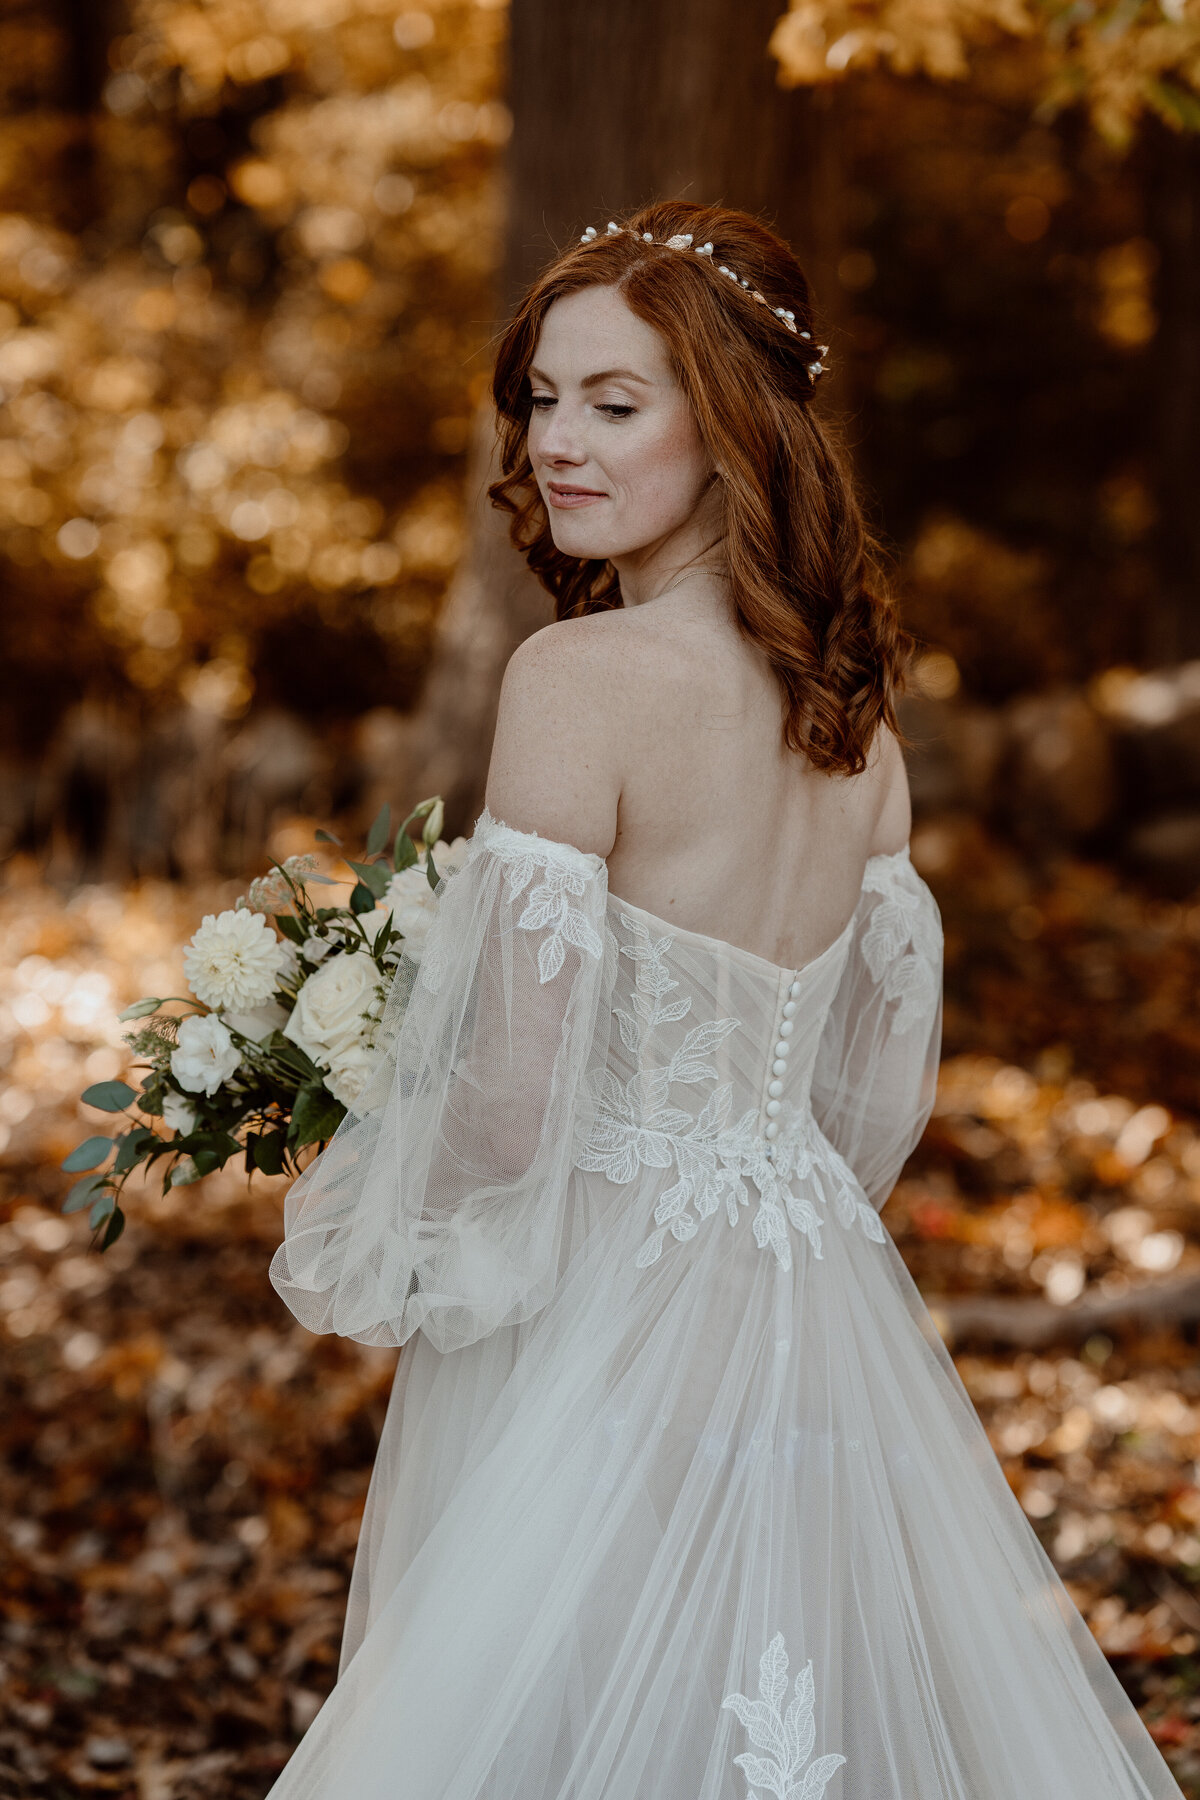 Bride with flowing red hair poses gracefully in an off-the-shoulder lace wedding gown, holding a bouquet of white flowers and greenery. Captured in a candid, documentary style, she stands amidst an autumnal forest backdrop, showcasing the natural beauty and elegance of the moment.